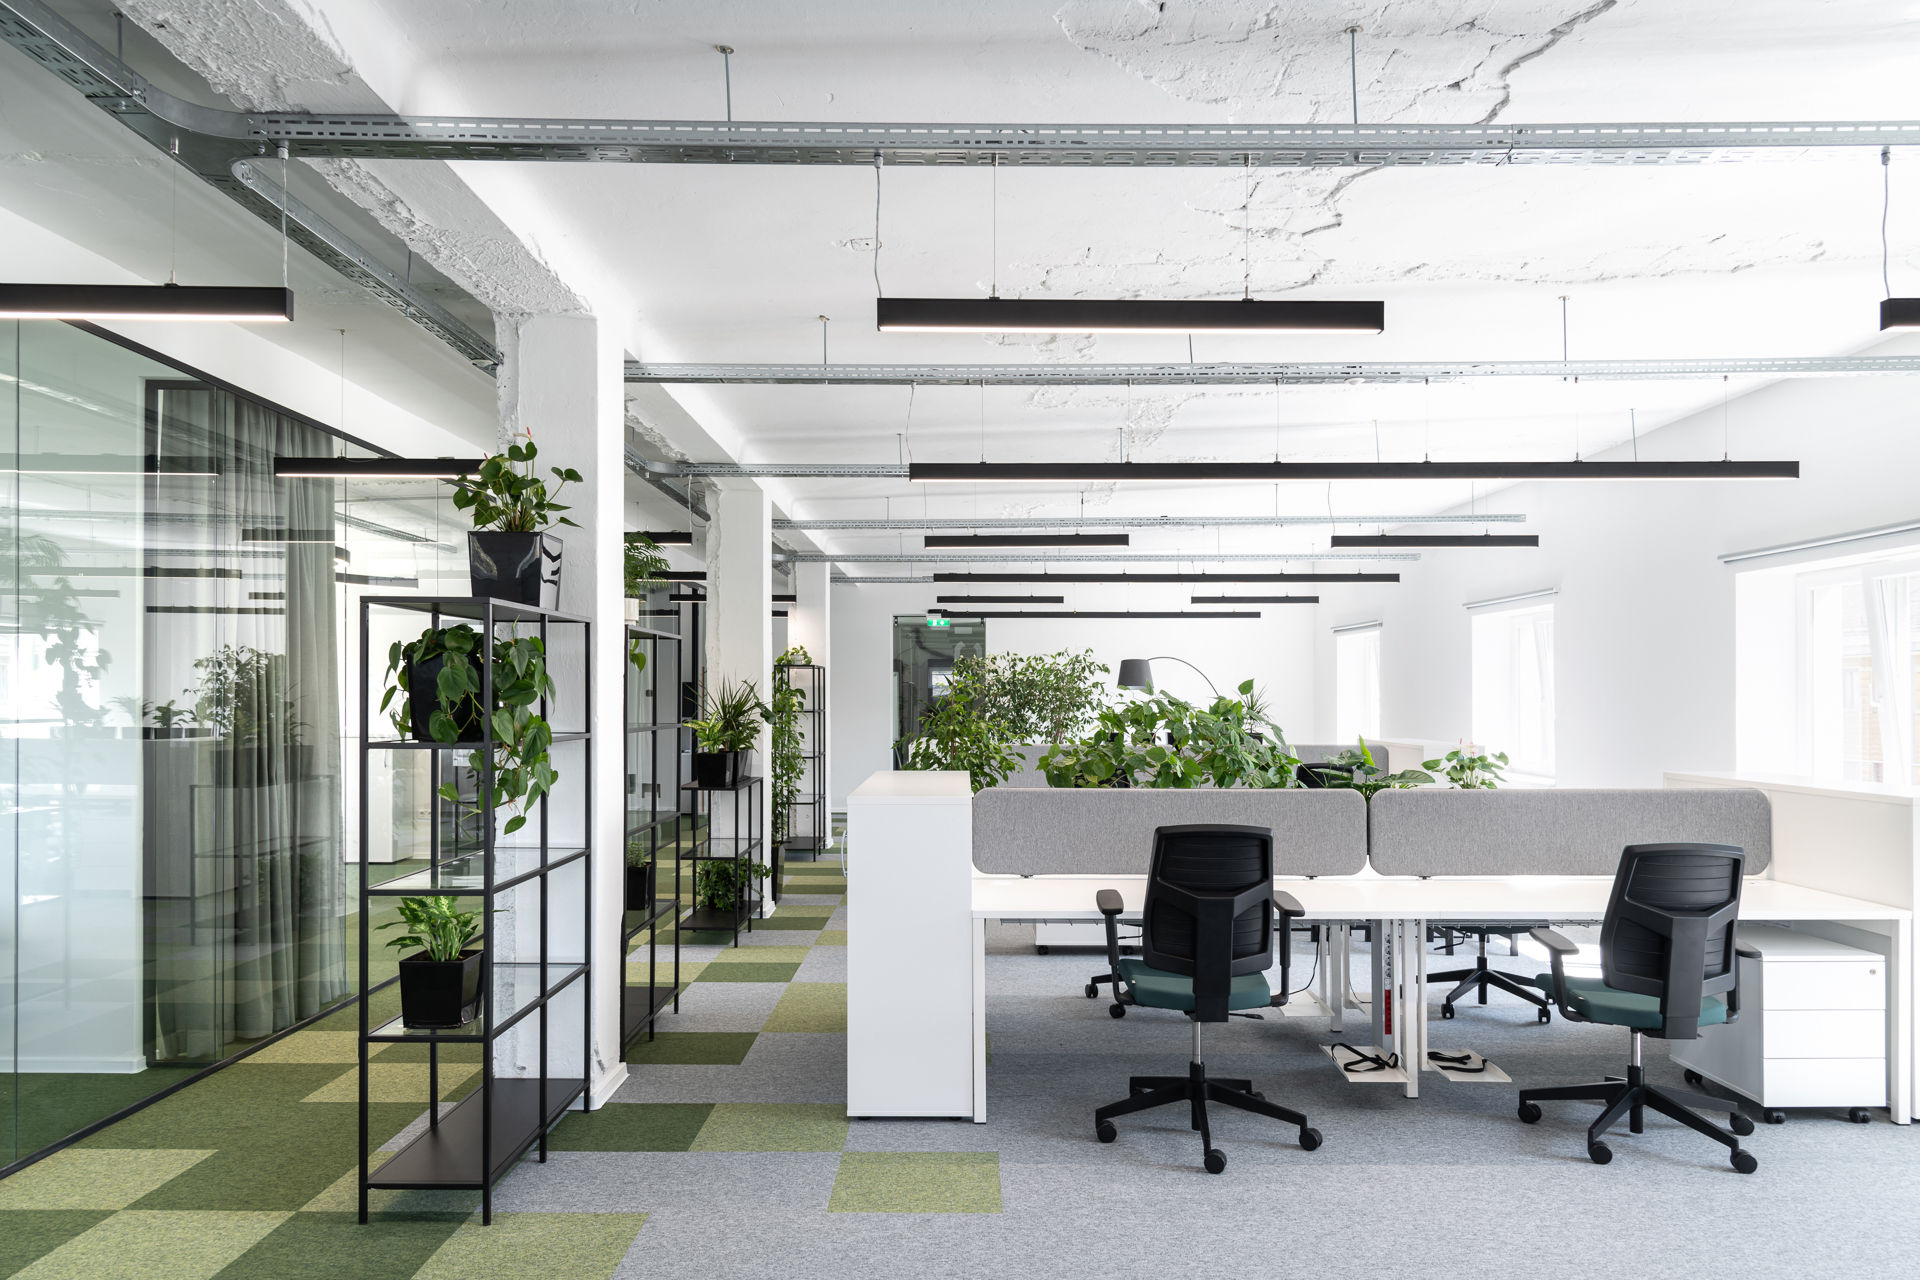 Ten verdant office interiors filled with trees and plants